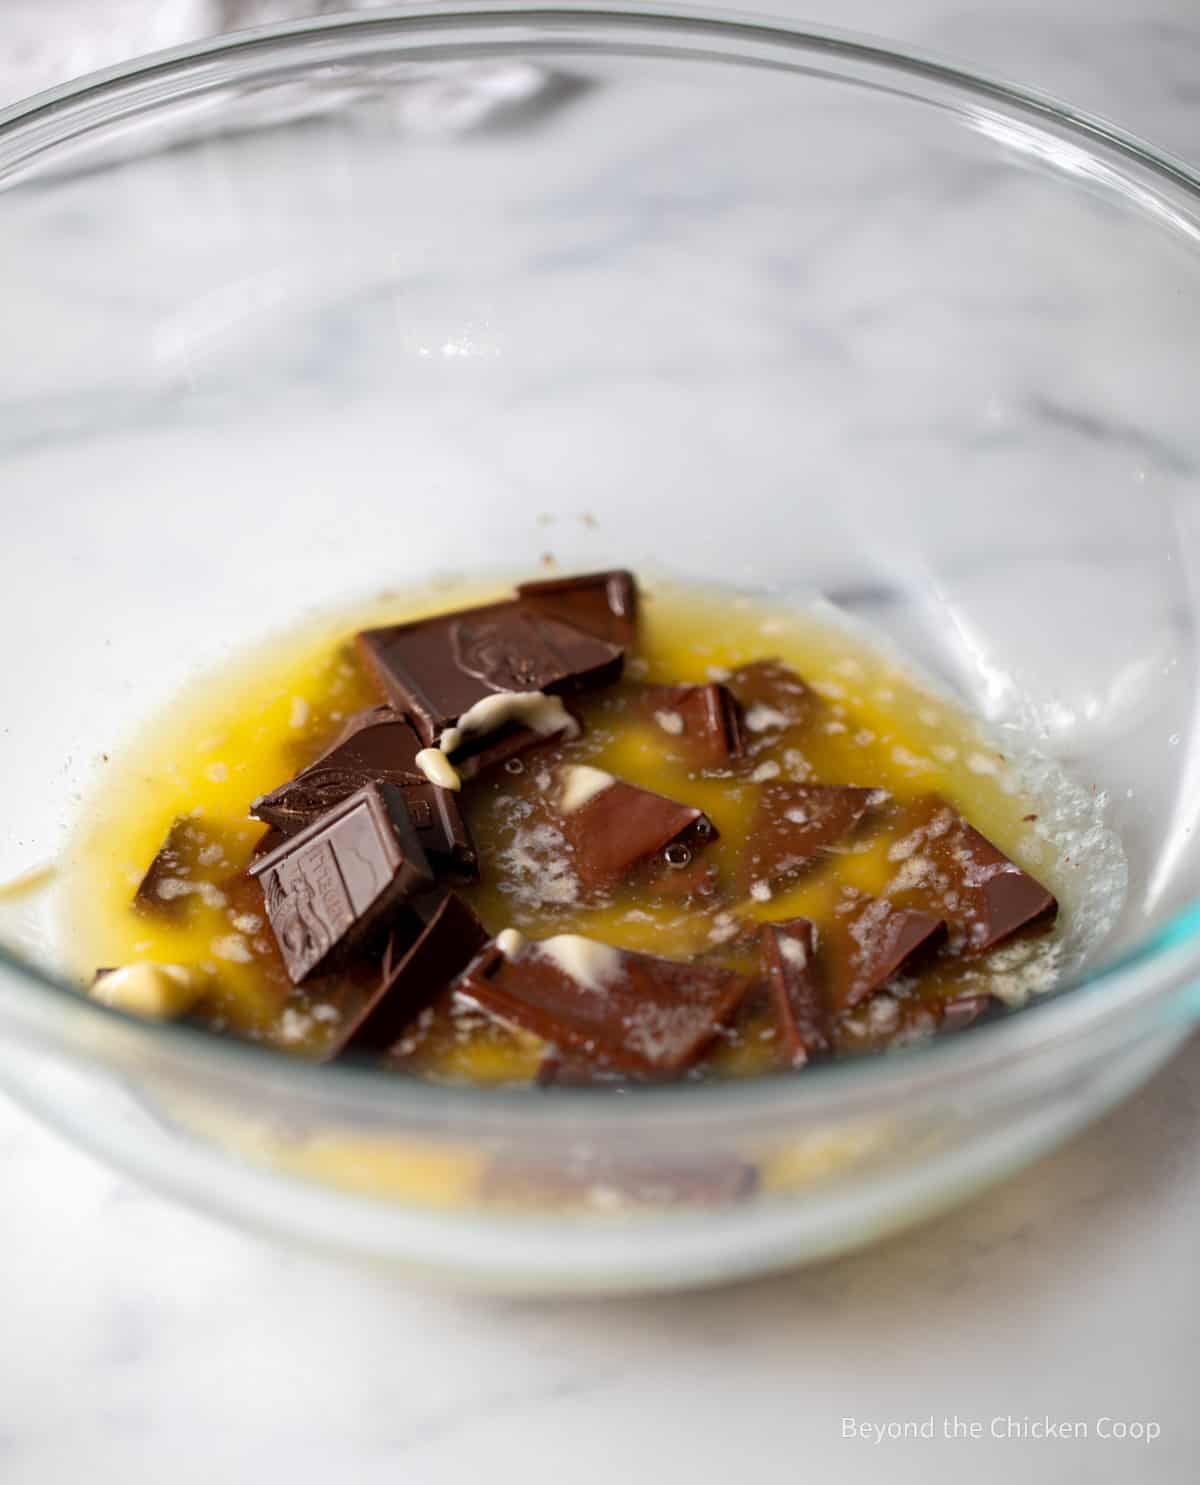 Chocolate and butter melting in a bowl.